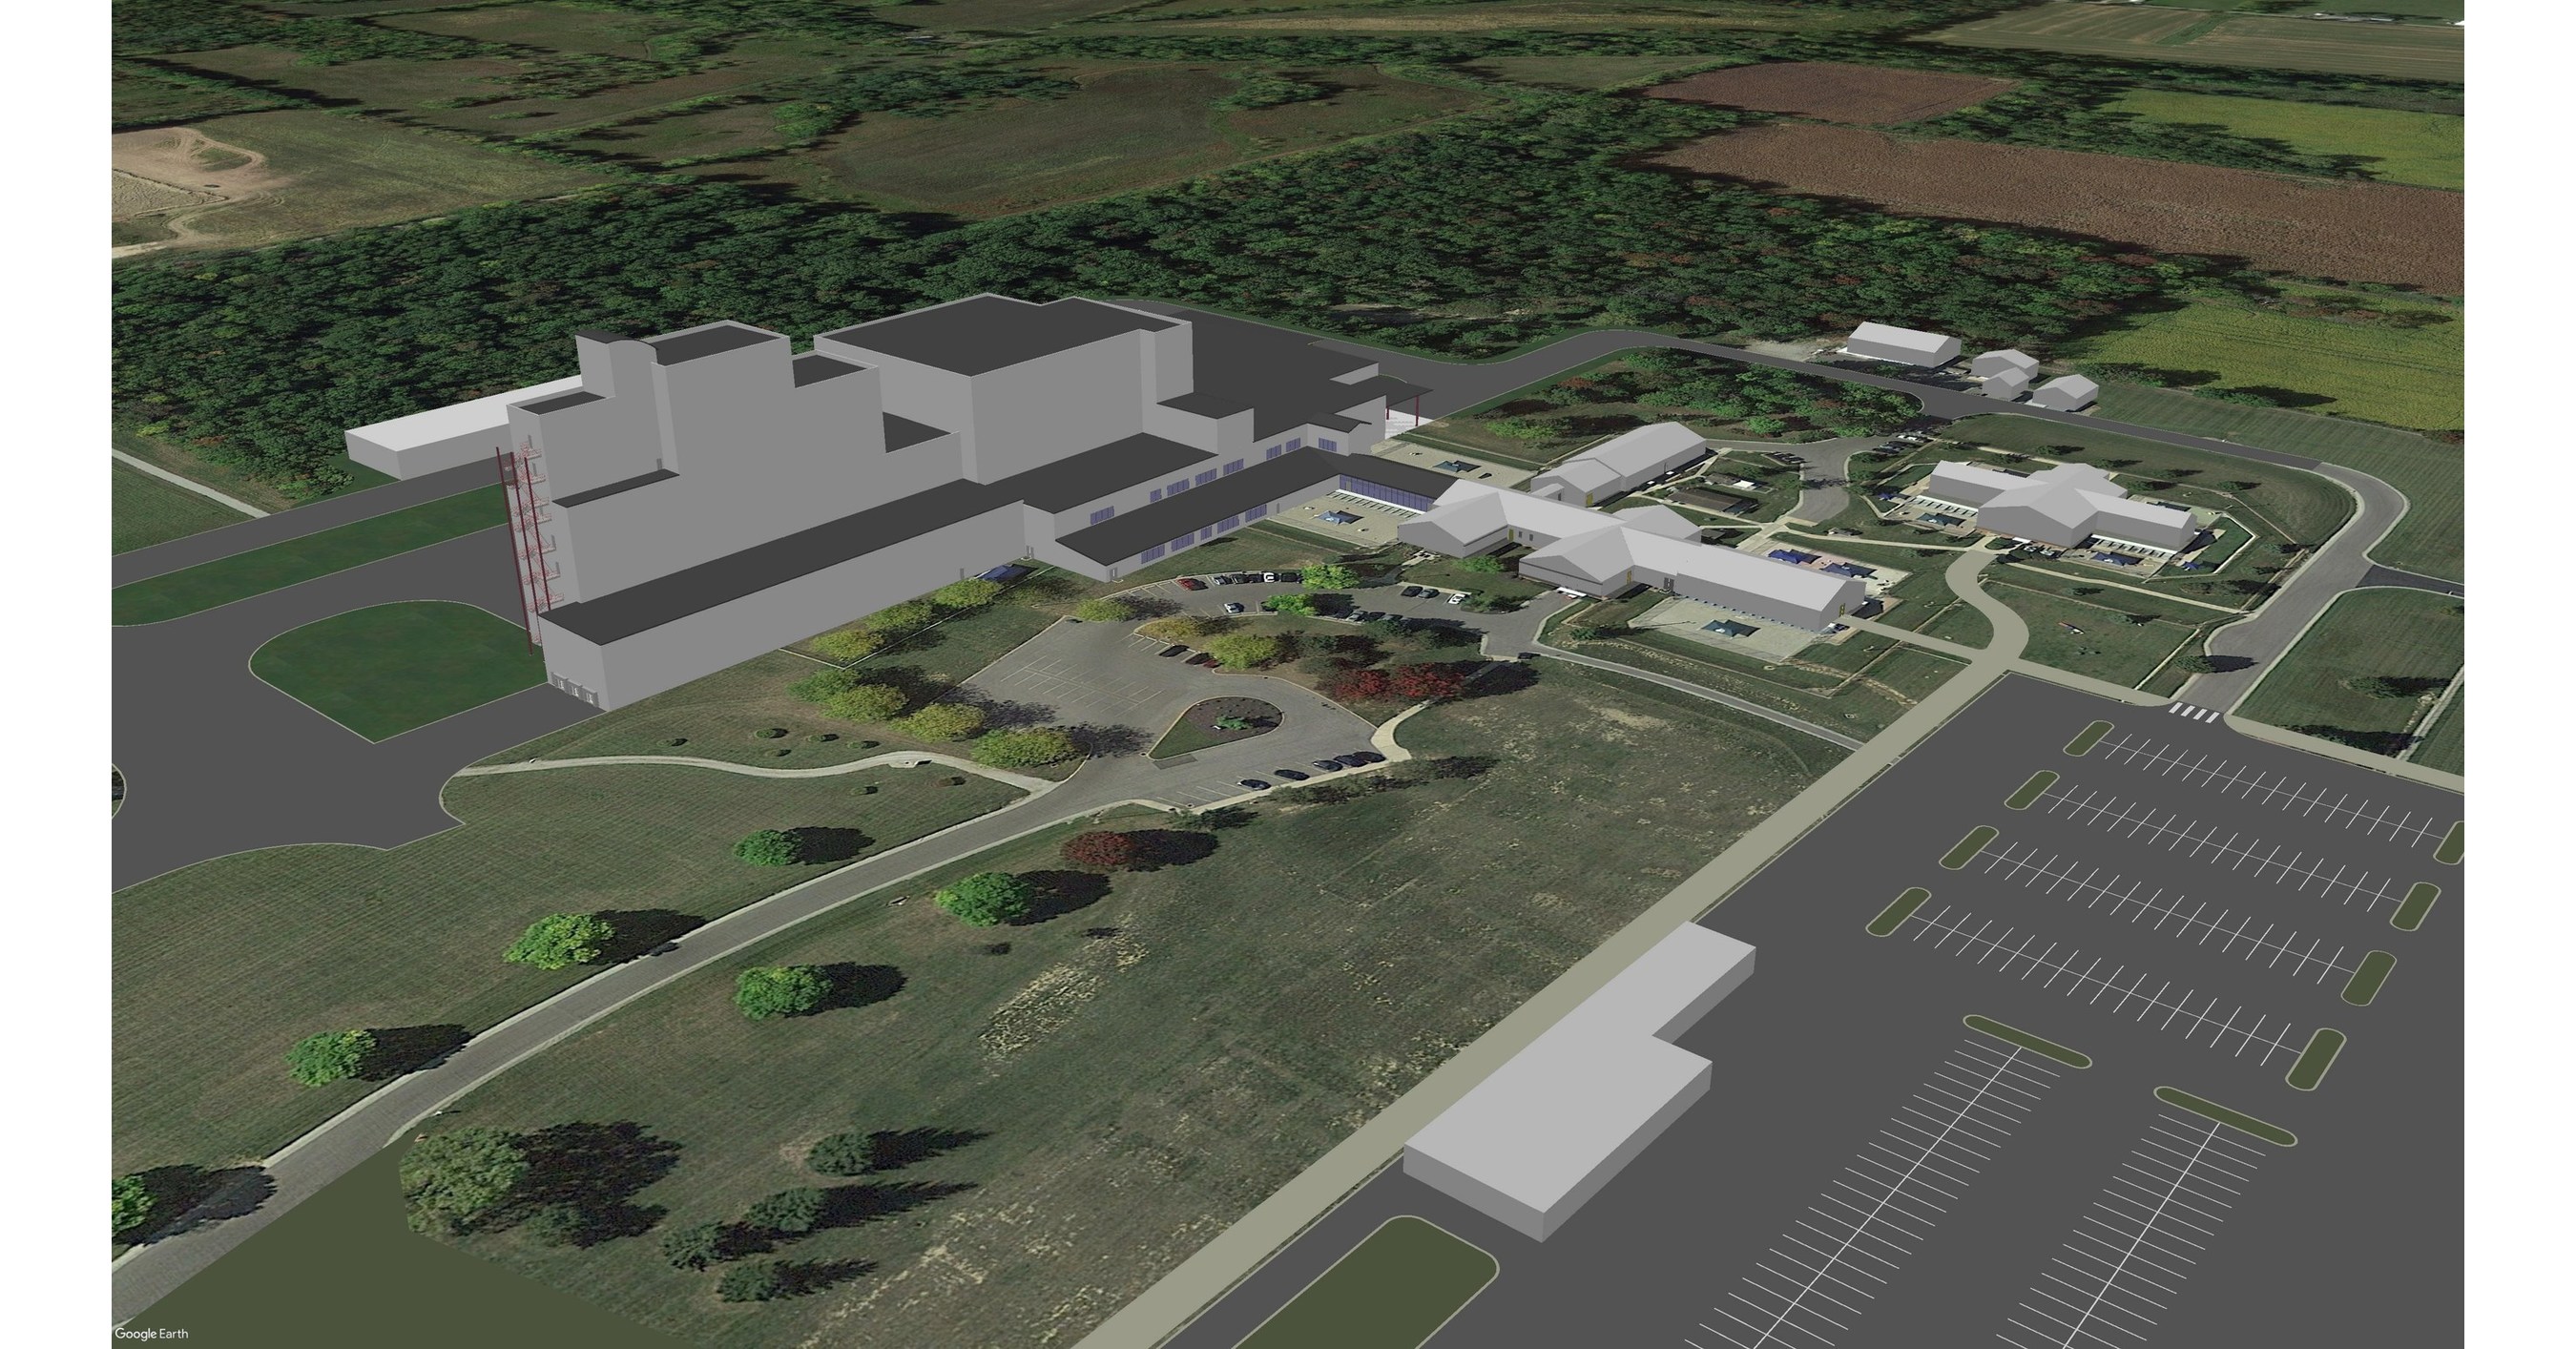  Royal Canin® Plans to Build New Factory in Ohio to Meet Growing Pet Food Demand 